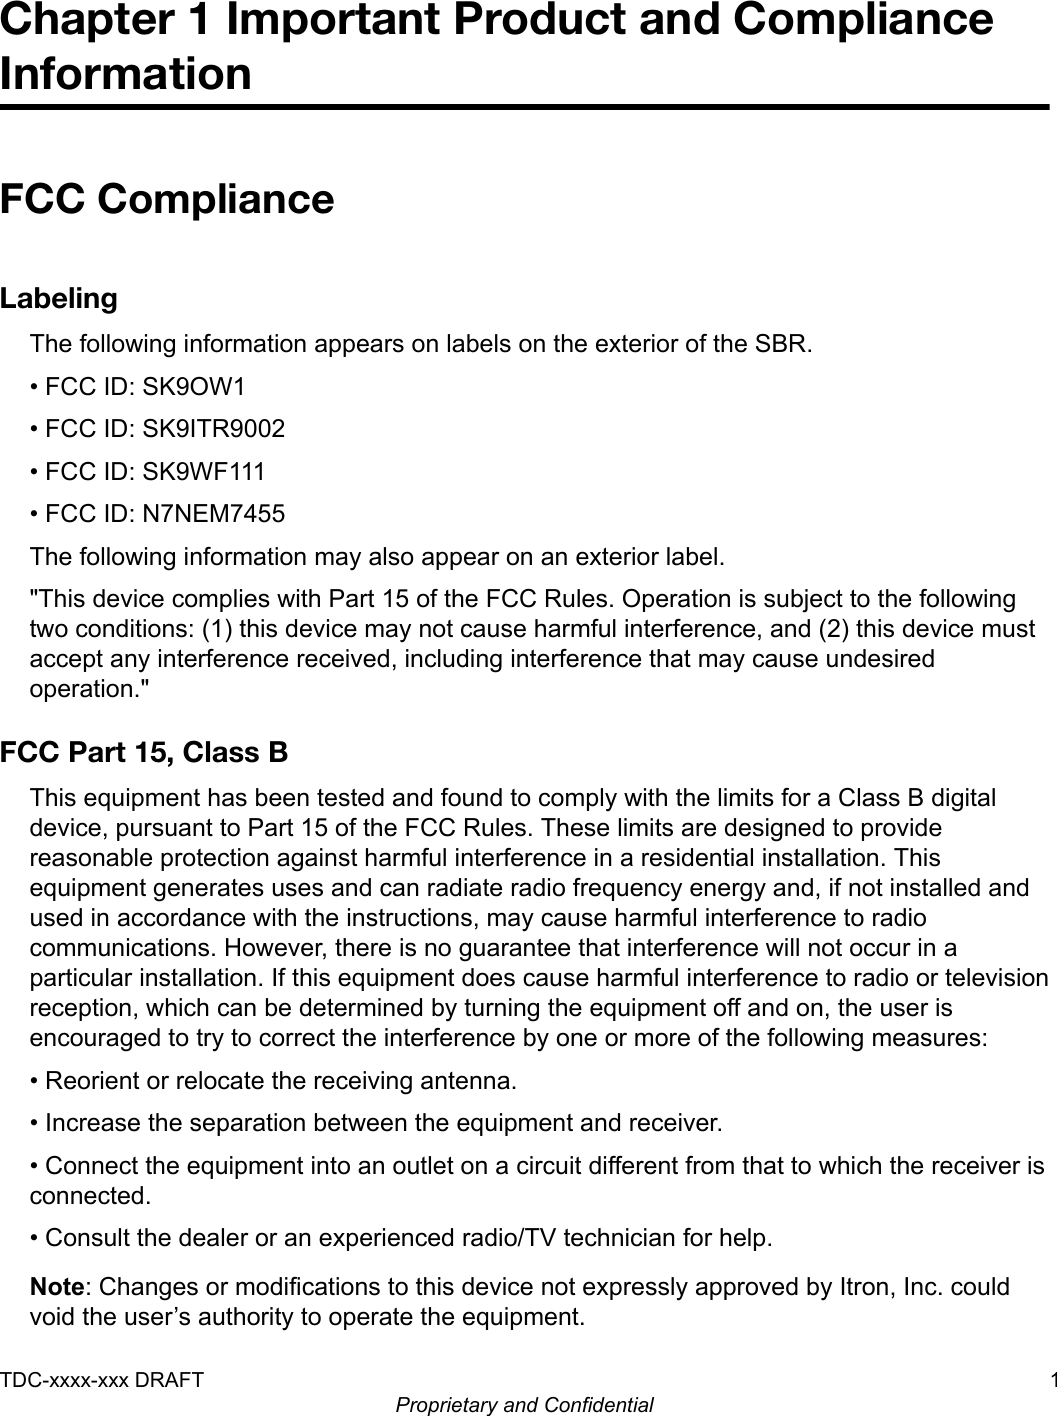 Chapter 1 Important Product and ComplianceInformationFCC ComplianceLabelingThe following information appears on labels on the exterior of the SBR.• FCC ID: SK9OW1• FCC ID: SK9ITR9002• FCC ID: SK9WF111• FCC ID: N7NEM7455The following information may also appear on an exterior label.&quot;This device complies with Part 15 of the FCC Rules. Operation is subject to the followingtwo conditions: (1) this device may not cause harmful interference, and (2) this device mustaccept any interference received, including interference that may cause undesiredoperation.&quot;FCC Part 15, Class BThis equipment has been tested and found to comply with the limits for a Class B digitaldevice, pursuant to Part 15 of the FCC Rules. These limits are designed to providereasonable protection against harmful interference in a residential installation. Thisequipment generates uses and can radiate radio frequency energy and, if not installed andused in accordance with the instructions, may cause harmful interference to radiocommunications. However, there is no guarantee that interference will not occur in aparticular installation. If this equipment does cause harmful interference to radio or televisionreception, which can be determined by turning the equipment off and on, the user isencouraged to try to correct the interference by one or more of the following measures:• Reorient or relocate the receiving antenna.• Increase the separation between the equipment and receiver.• Connect the equipment into an outlet on a circuit different from that to which the receiver isconnected.• Consult the dealer or an experienced radio/TV technician for help.Note: Changes or modifications to this device not expressly approved by Itron, Inc. couldvoid the user’s authority to operate the equipment.TDC-xxxx-xxx DRAFT 1Proprietary and Confidential